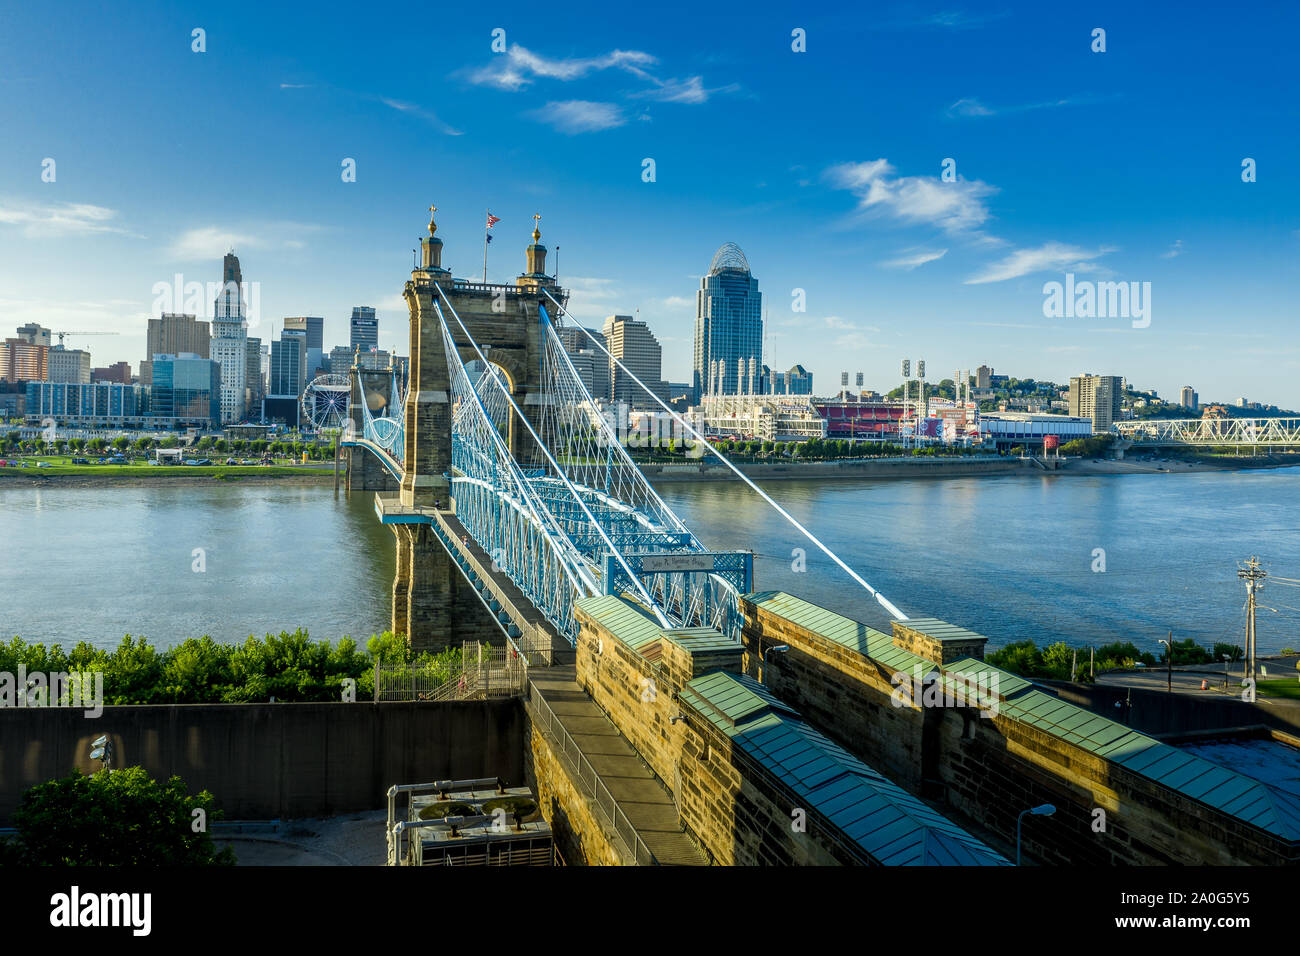 Panoramic view of Cincinnati downtown with the historic Roebling suspension bridge over the Ohio river Stock Photo